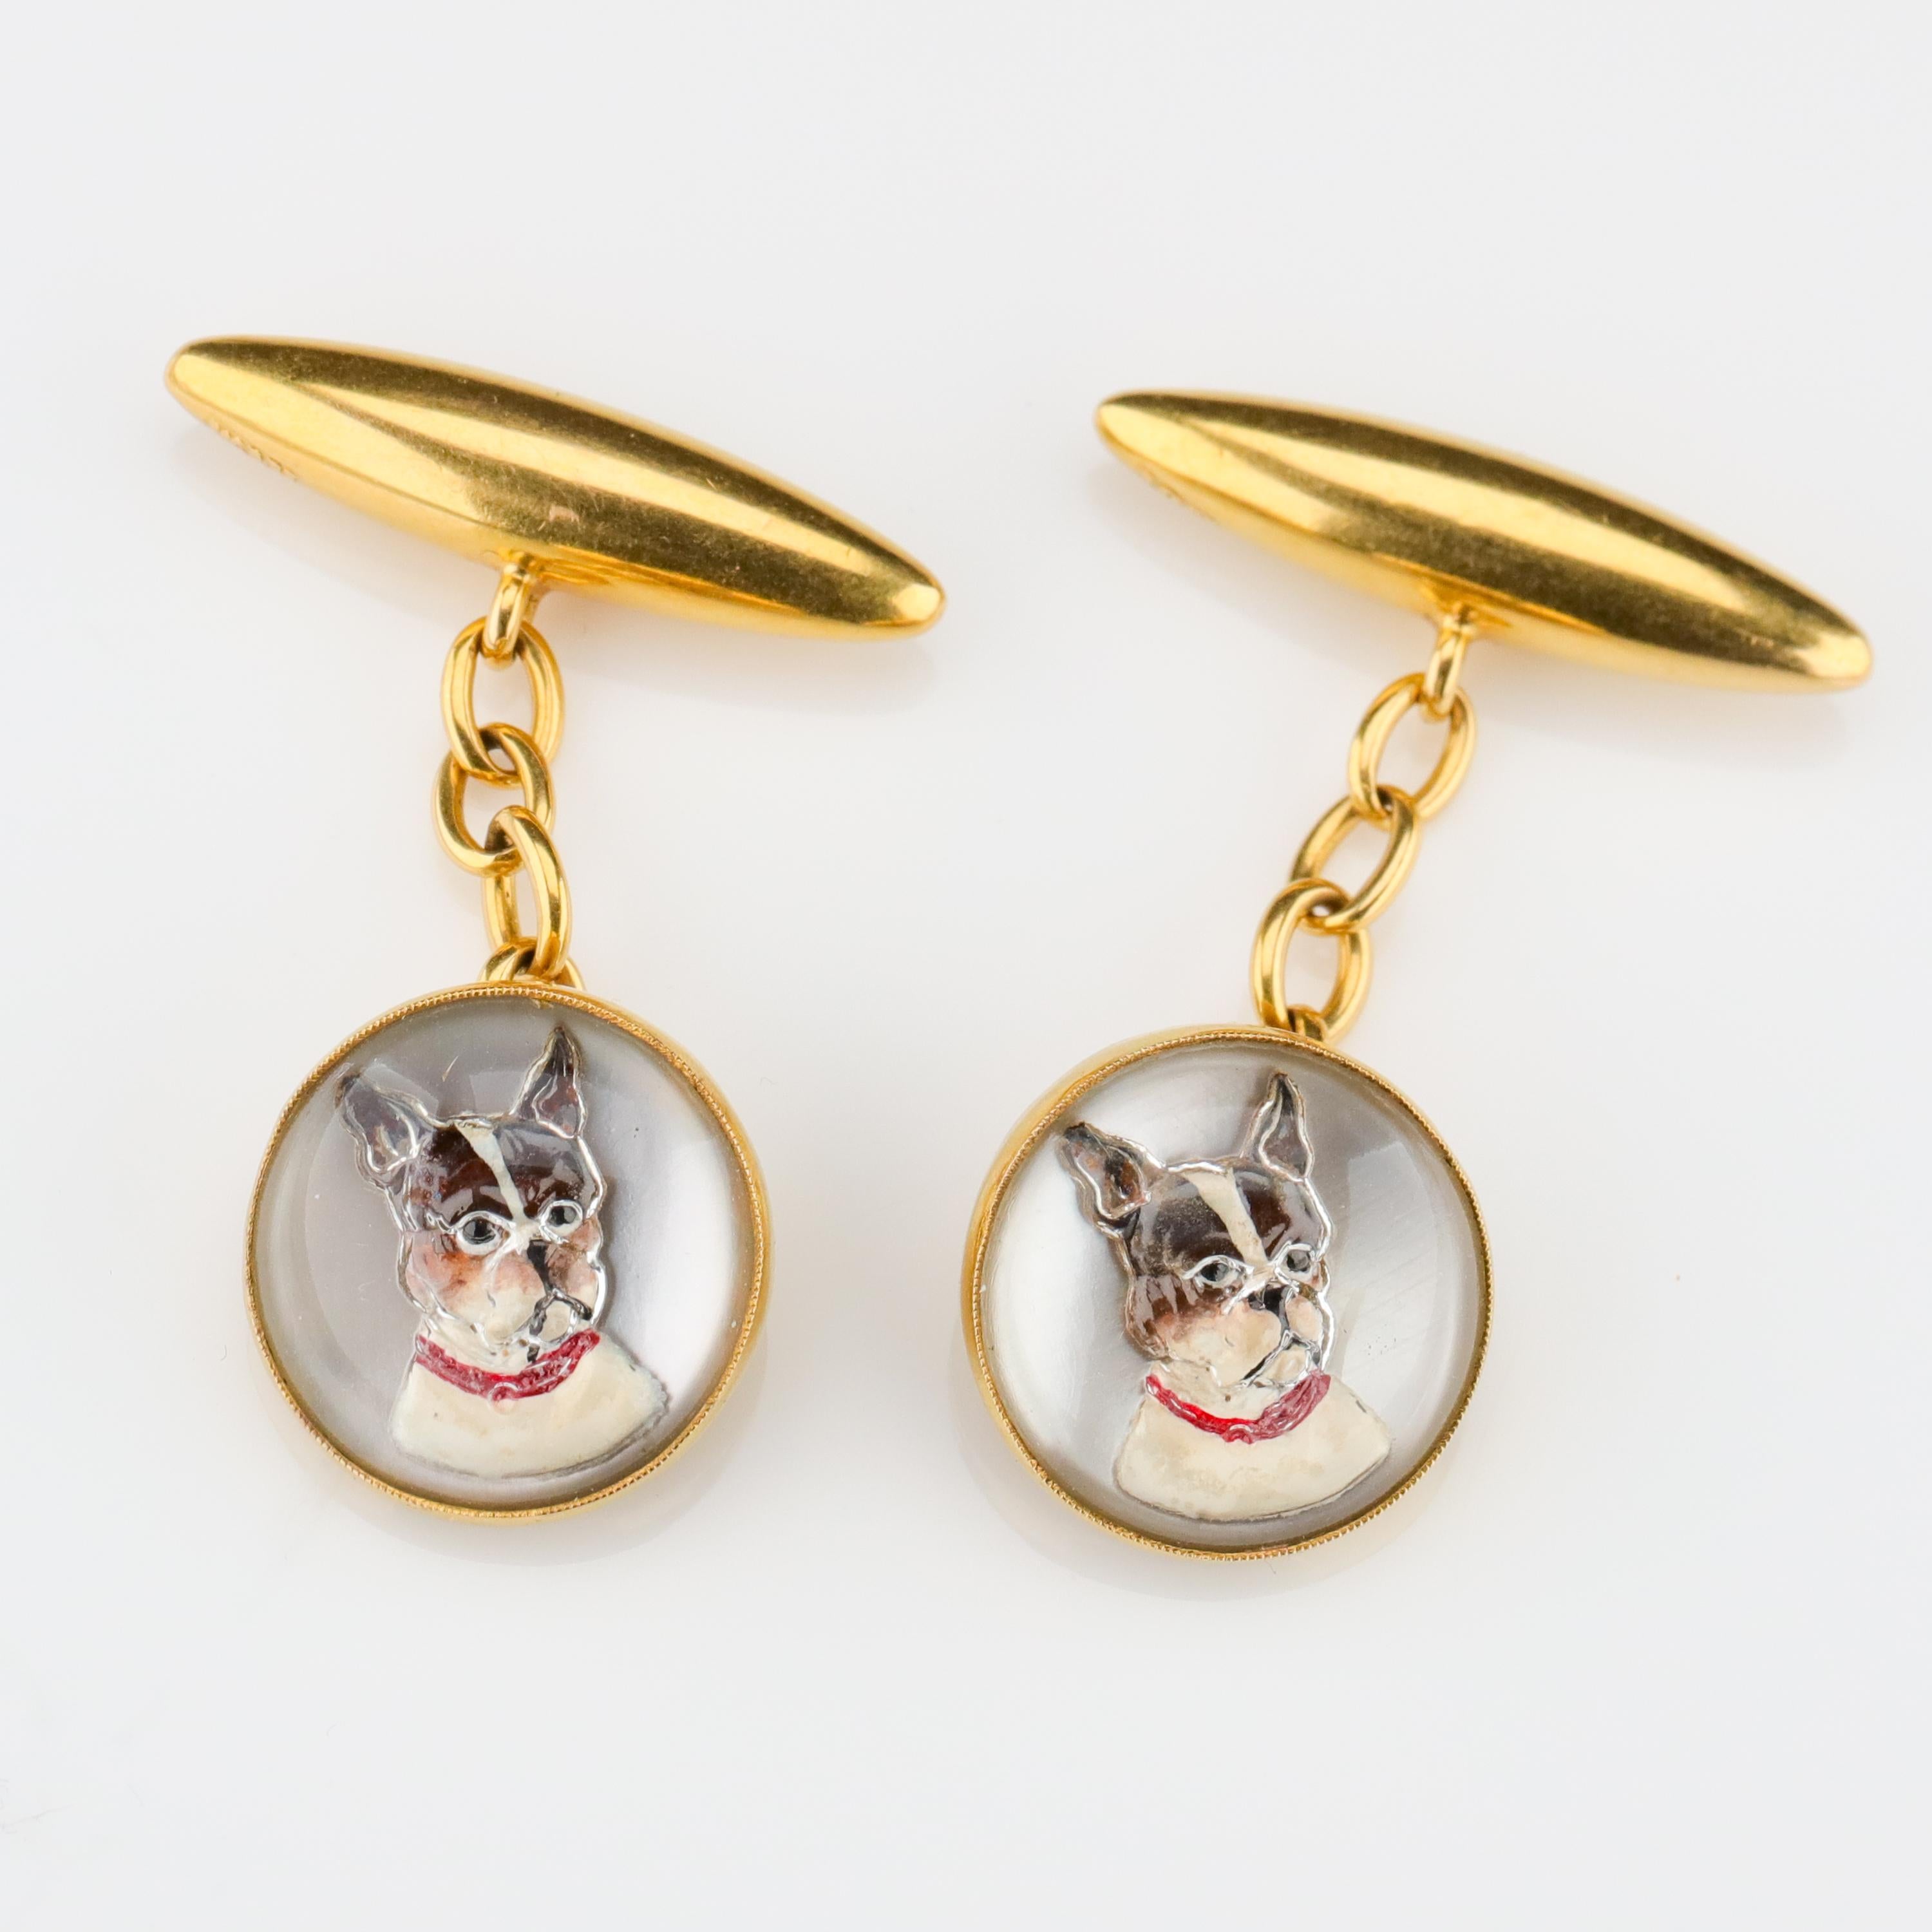 Carved crystal cabochons are painted on the reverse to portray two little black and white terriers. Perhaps the only thing more wonderful in the world than a pair of carved crystal cufflinks from England depicting man's best friend is a pair of